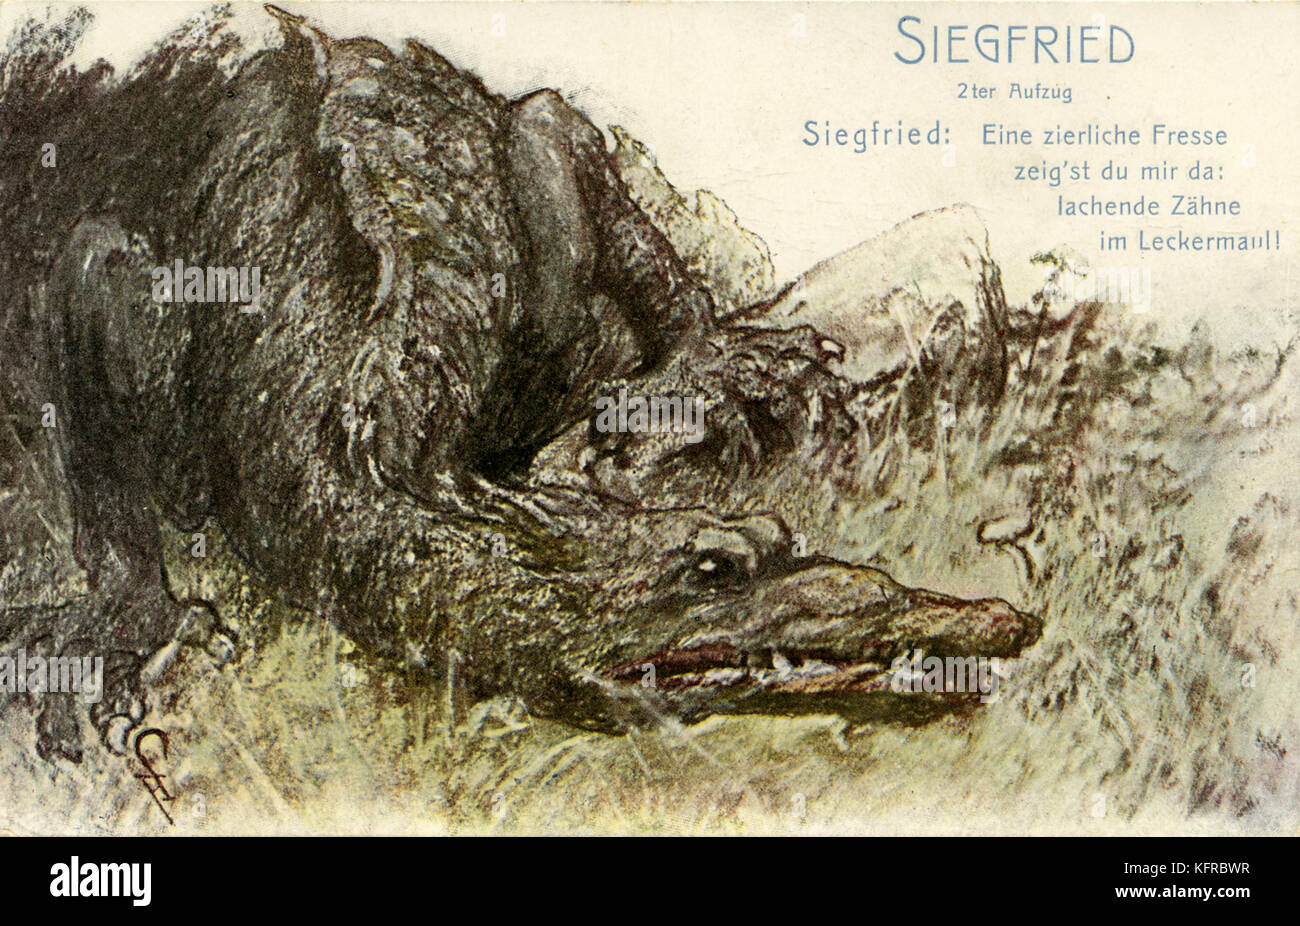 Siegfried by Wagner - illustration. Richard Wagner, German composer & author: 22 May 1813 - 13 February 1883. Illustration of Fafner, the dragon. From Act II of the opera 'Siegfried', the third of the tetralogy 'Der Ring des Nibelungen' (The Ring of the Nibelung, The Nibelungenlied, The Ring Cycle). Caption reads: 'A dainty kisser/ you show me there/ laughing teeth/in a delicious maw!'  ('eine zierliche Fresse/ zeig'st du mir da:/ lachende Zähne/ im Leckermaul!') Stock Photo